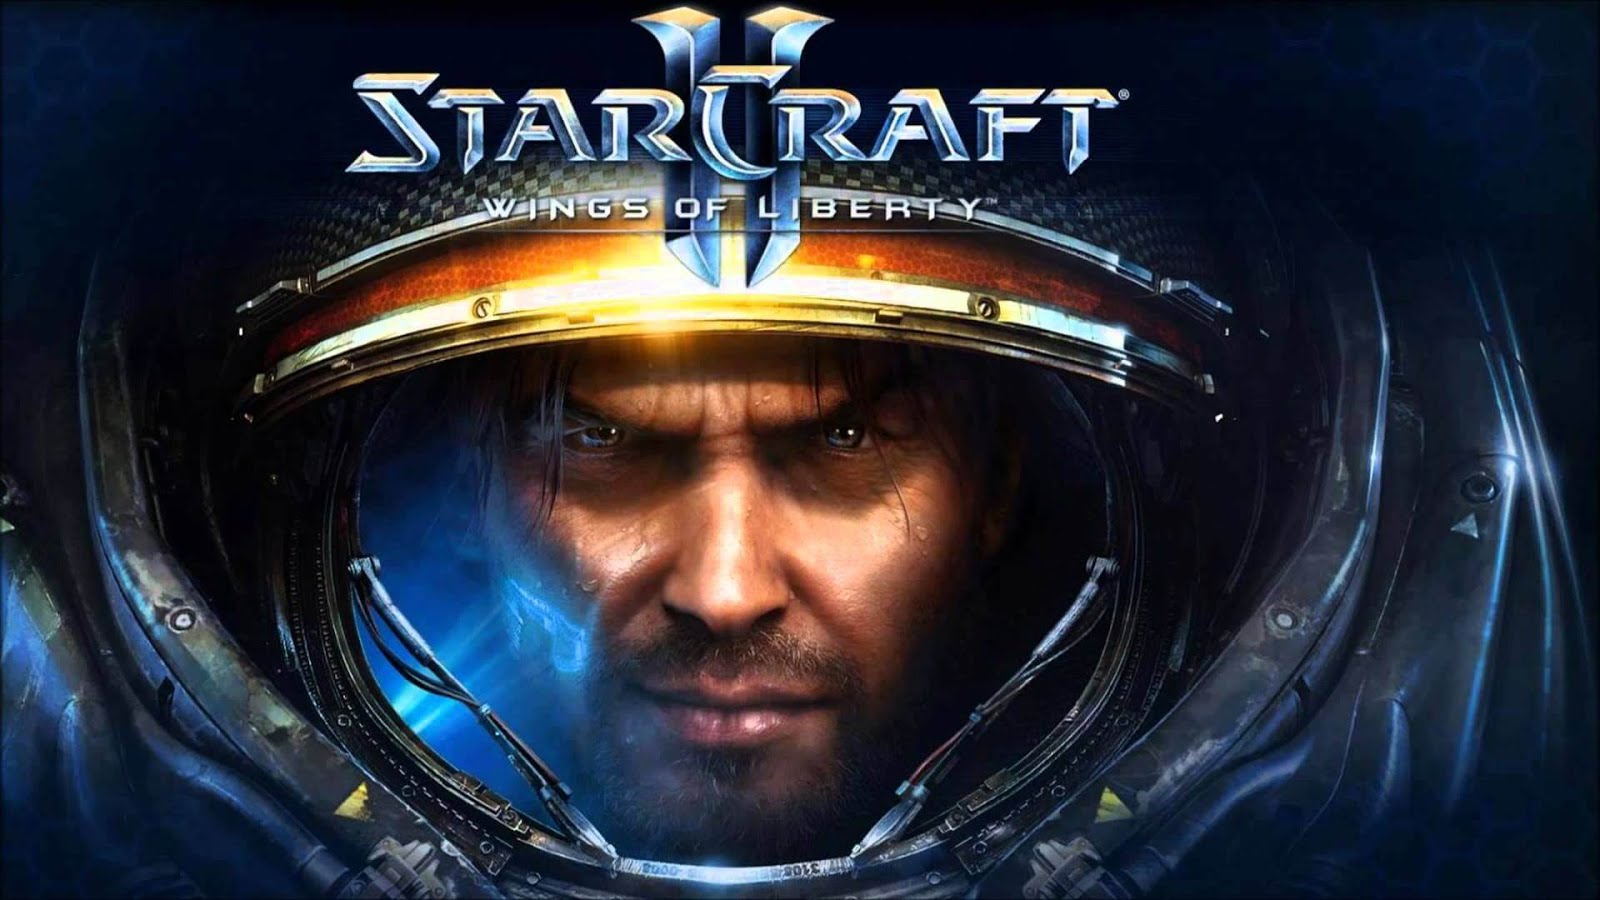 10 Best Strategy Games for PC, Gaming, Gaming Tips and Tricks,Starcraft II - Wings of Liberty